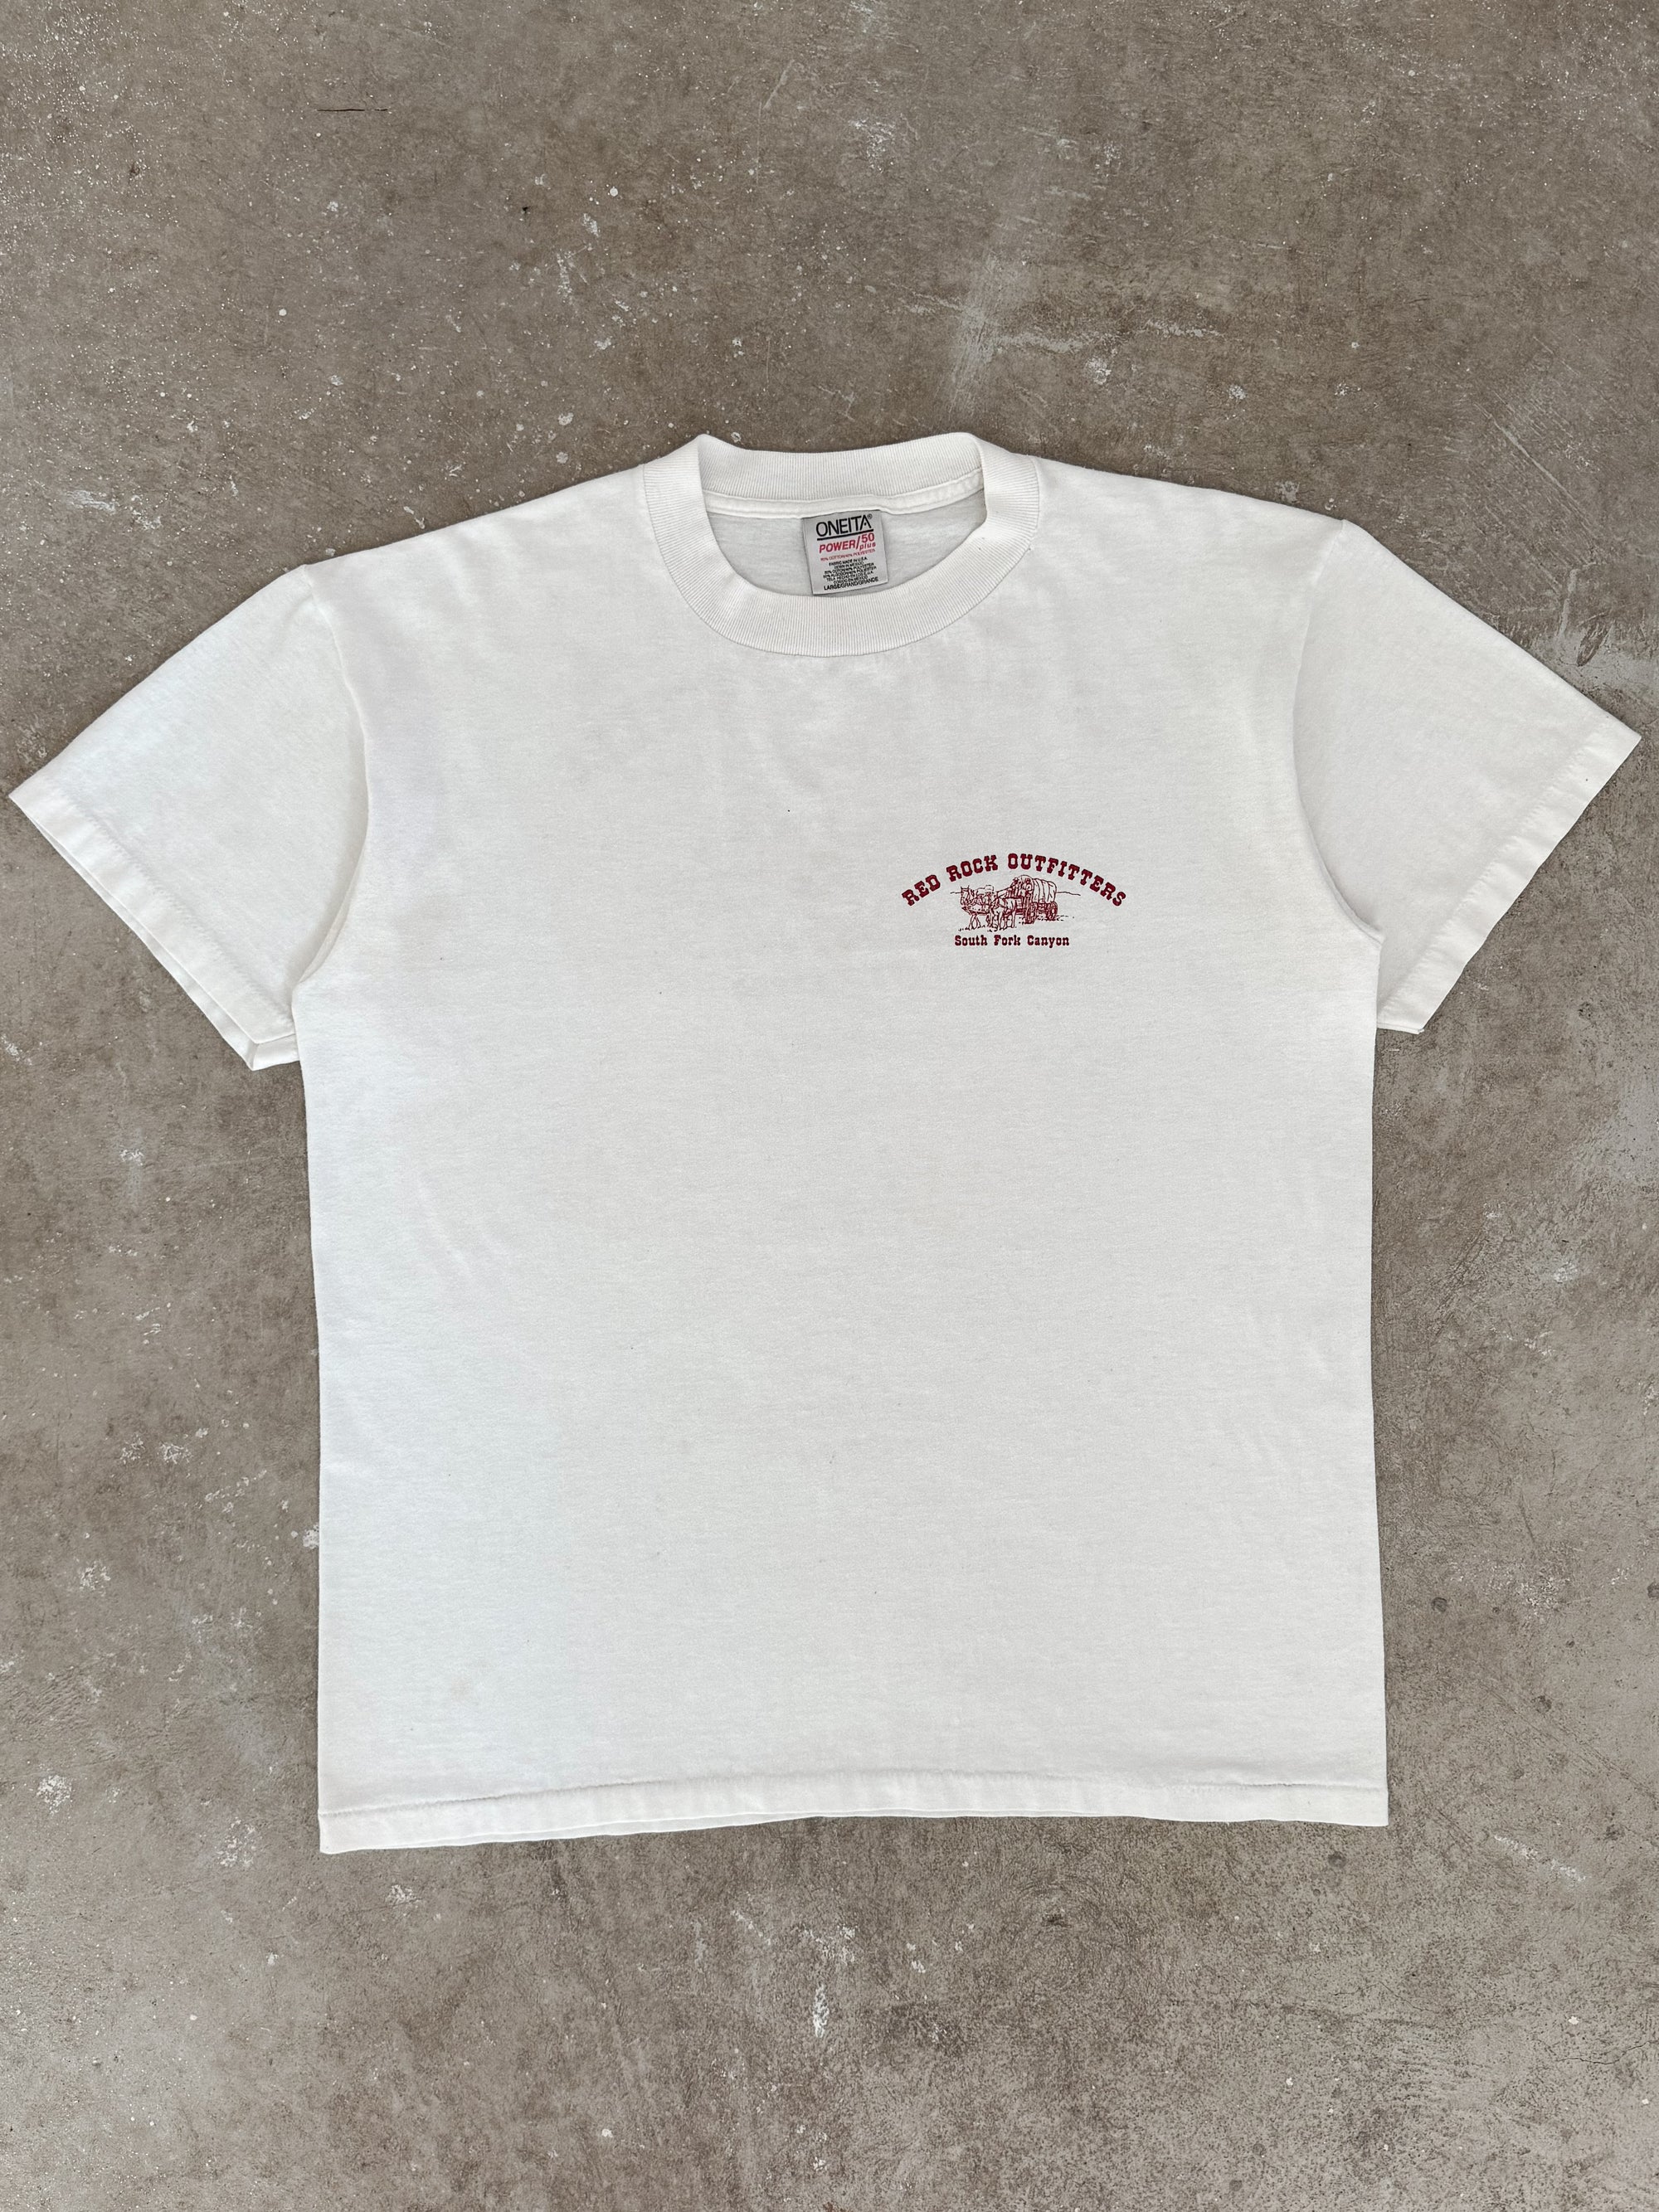 1990s "Red Rock Outfitters" Tee (L)